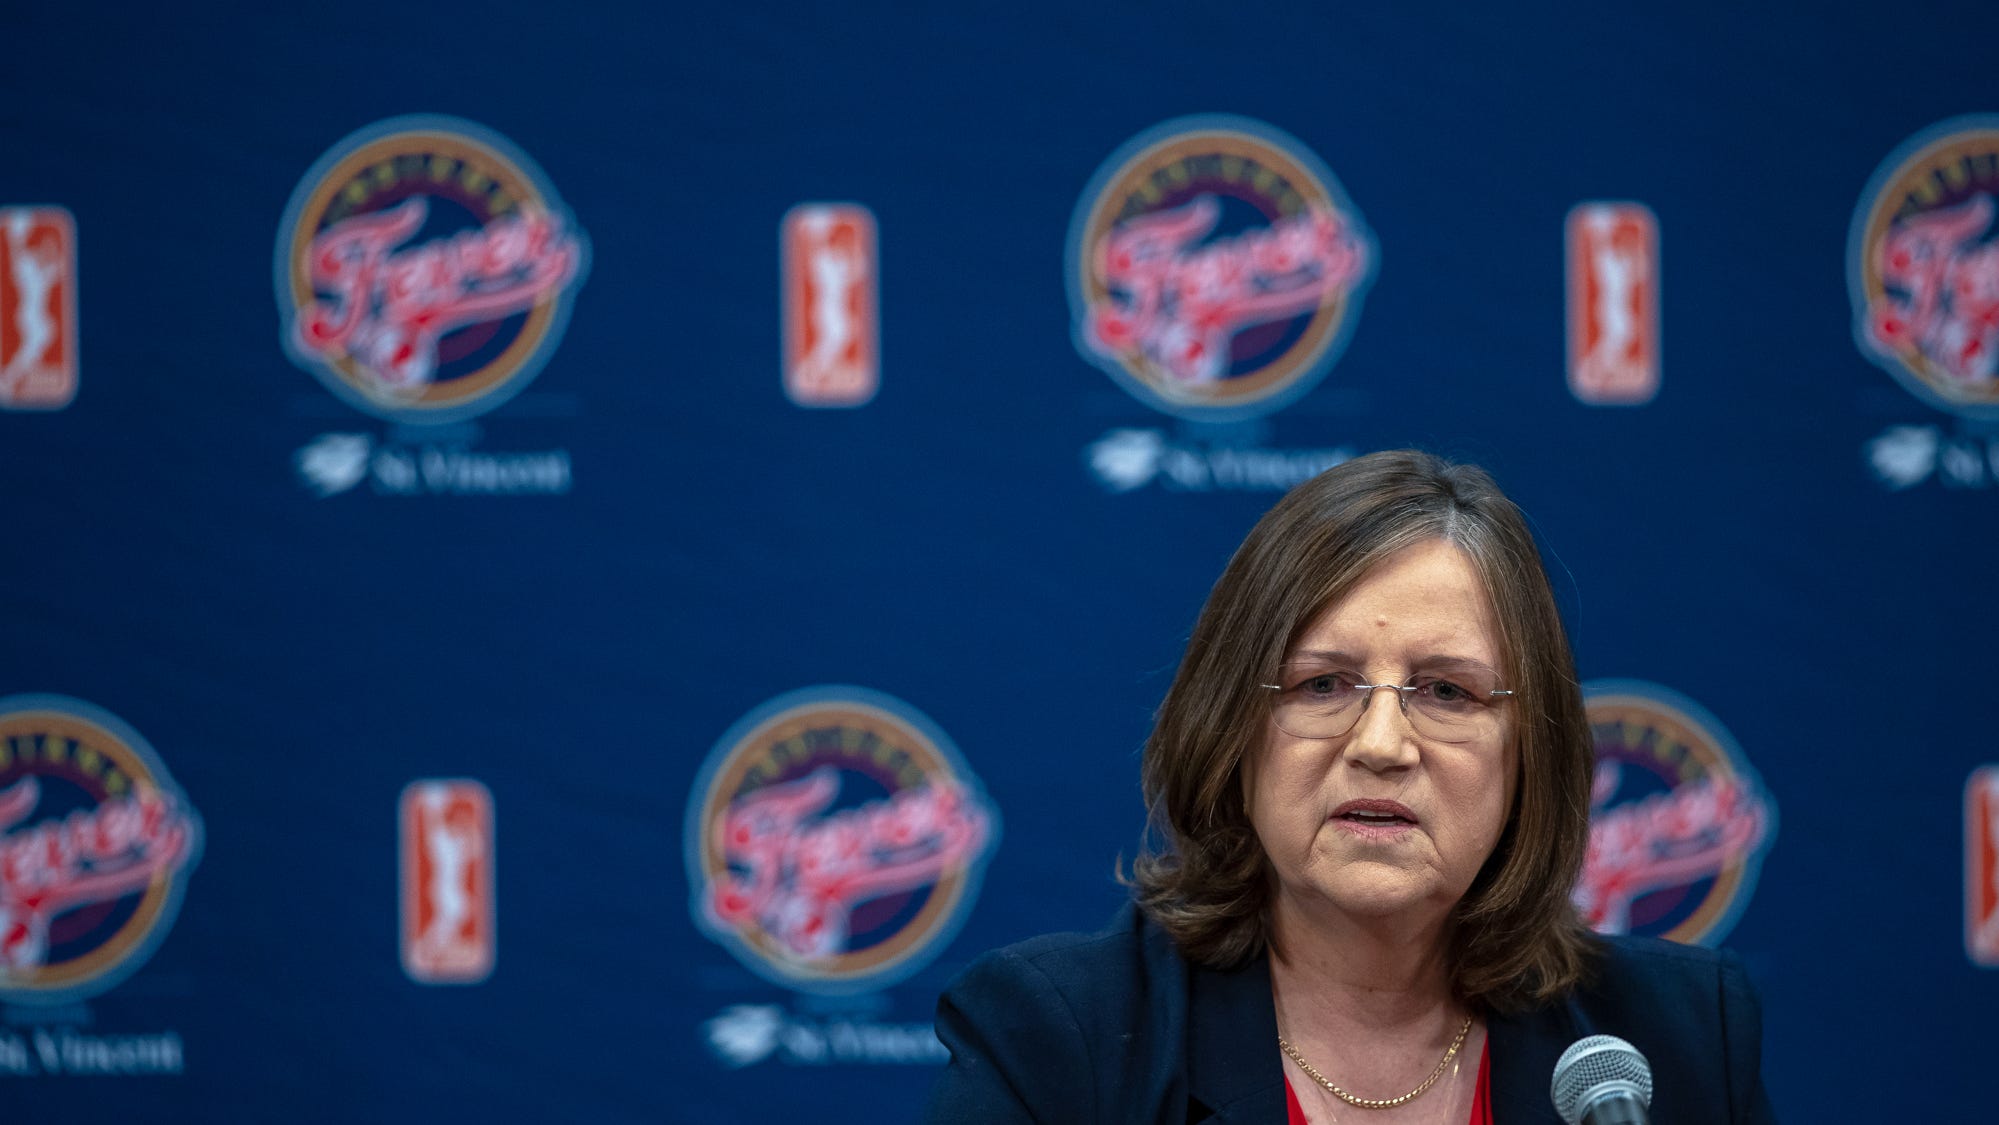 New Indiana Fever coach Marianne Stanley builds a team via Zoom